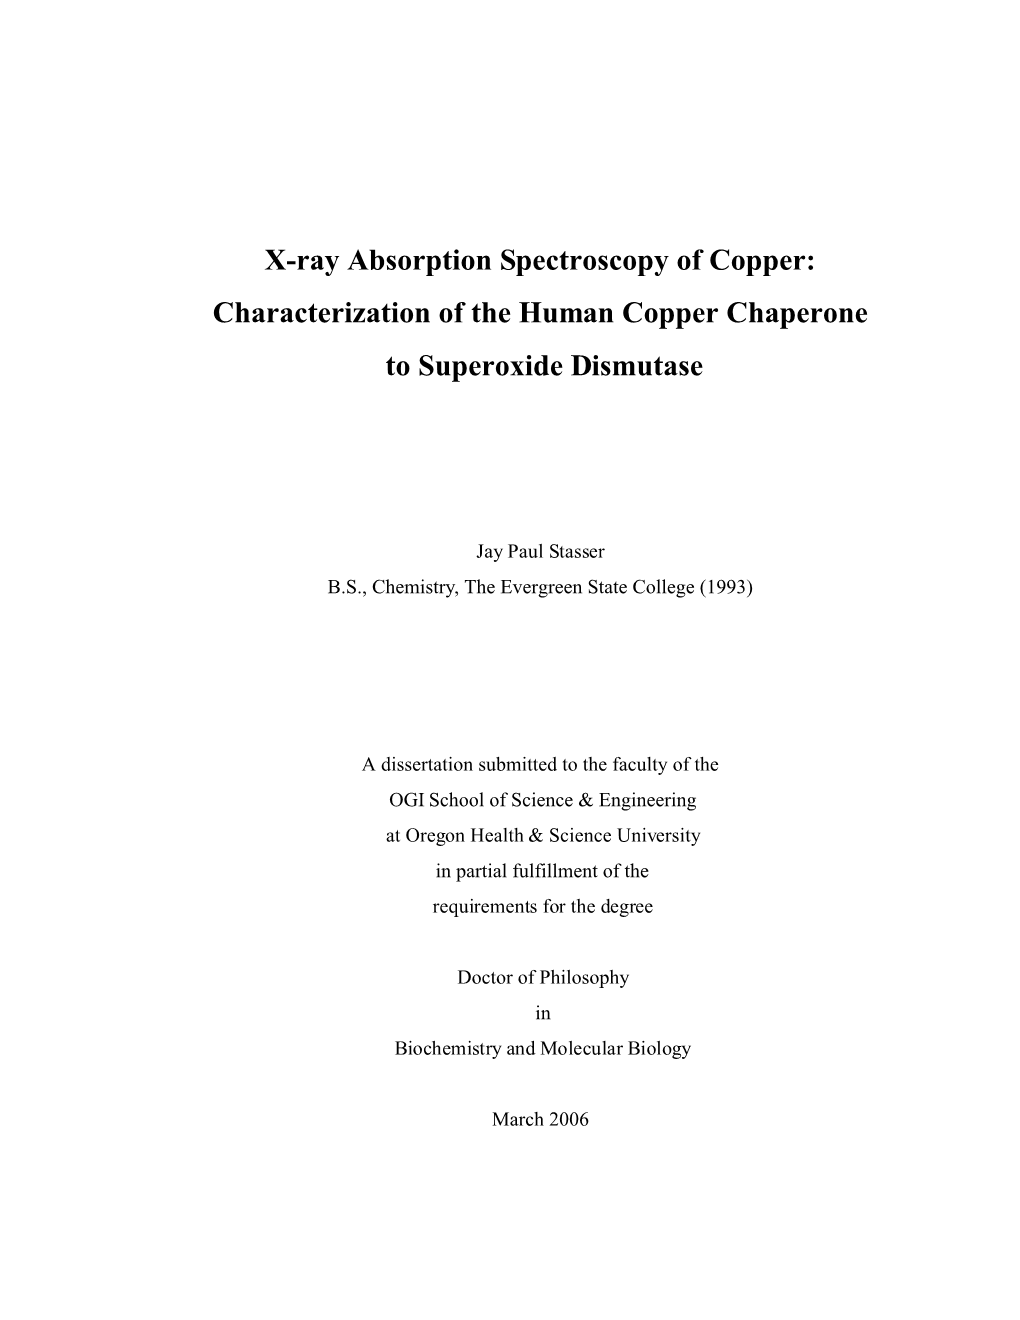 Characterization of the Human Copper Chaperone to Superoxide Dismutase